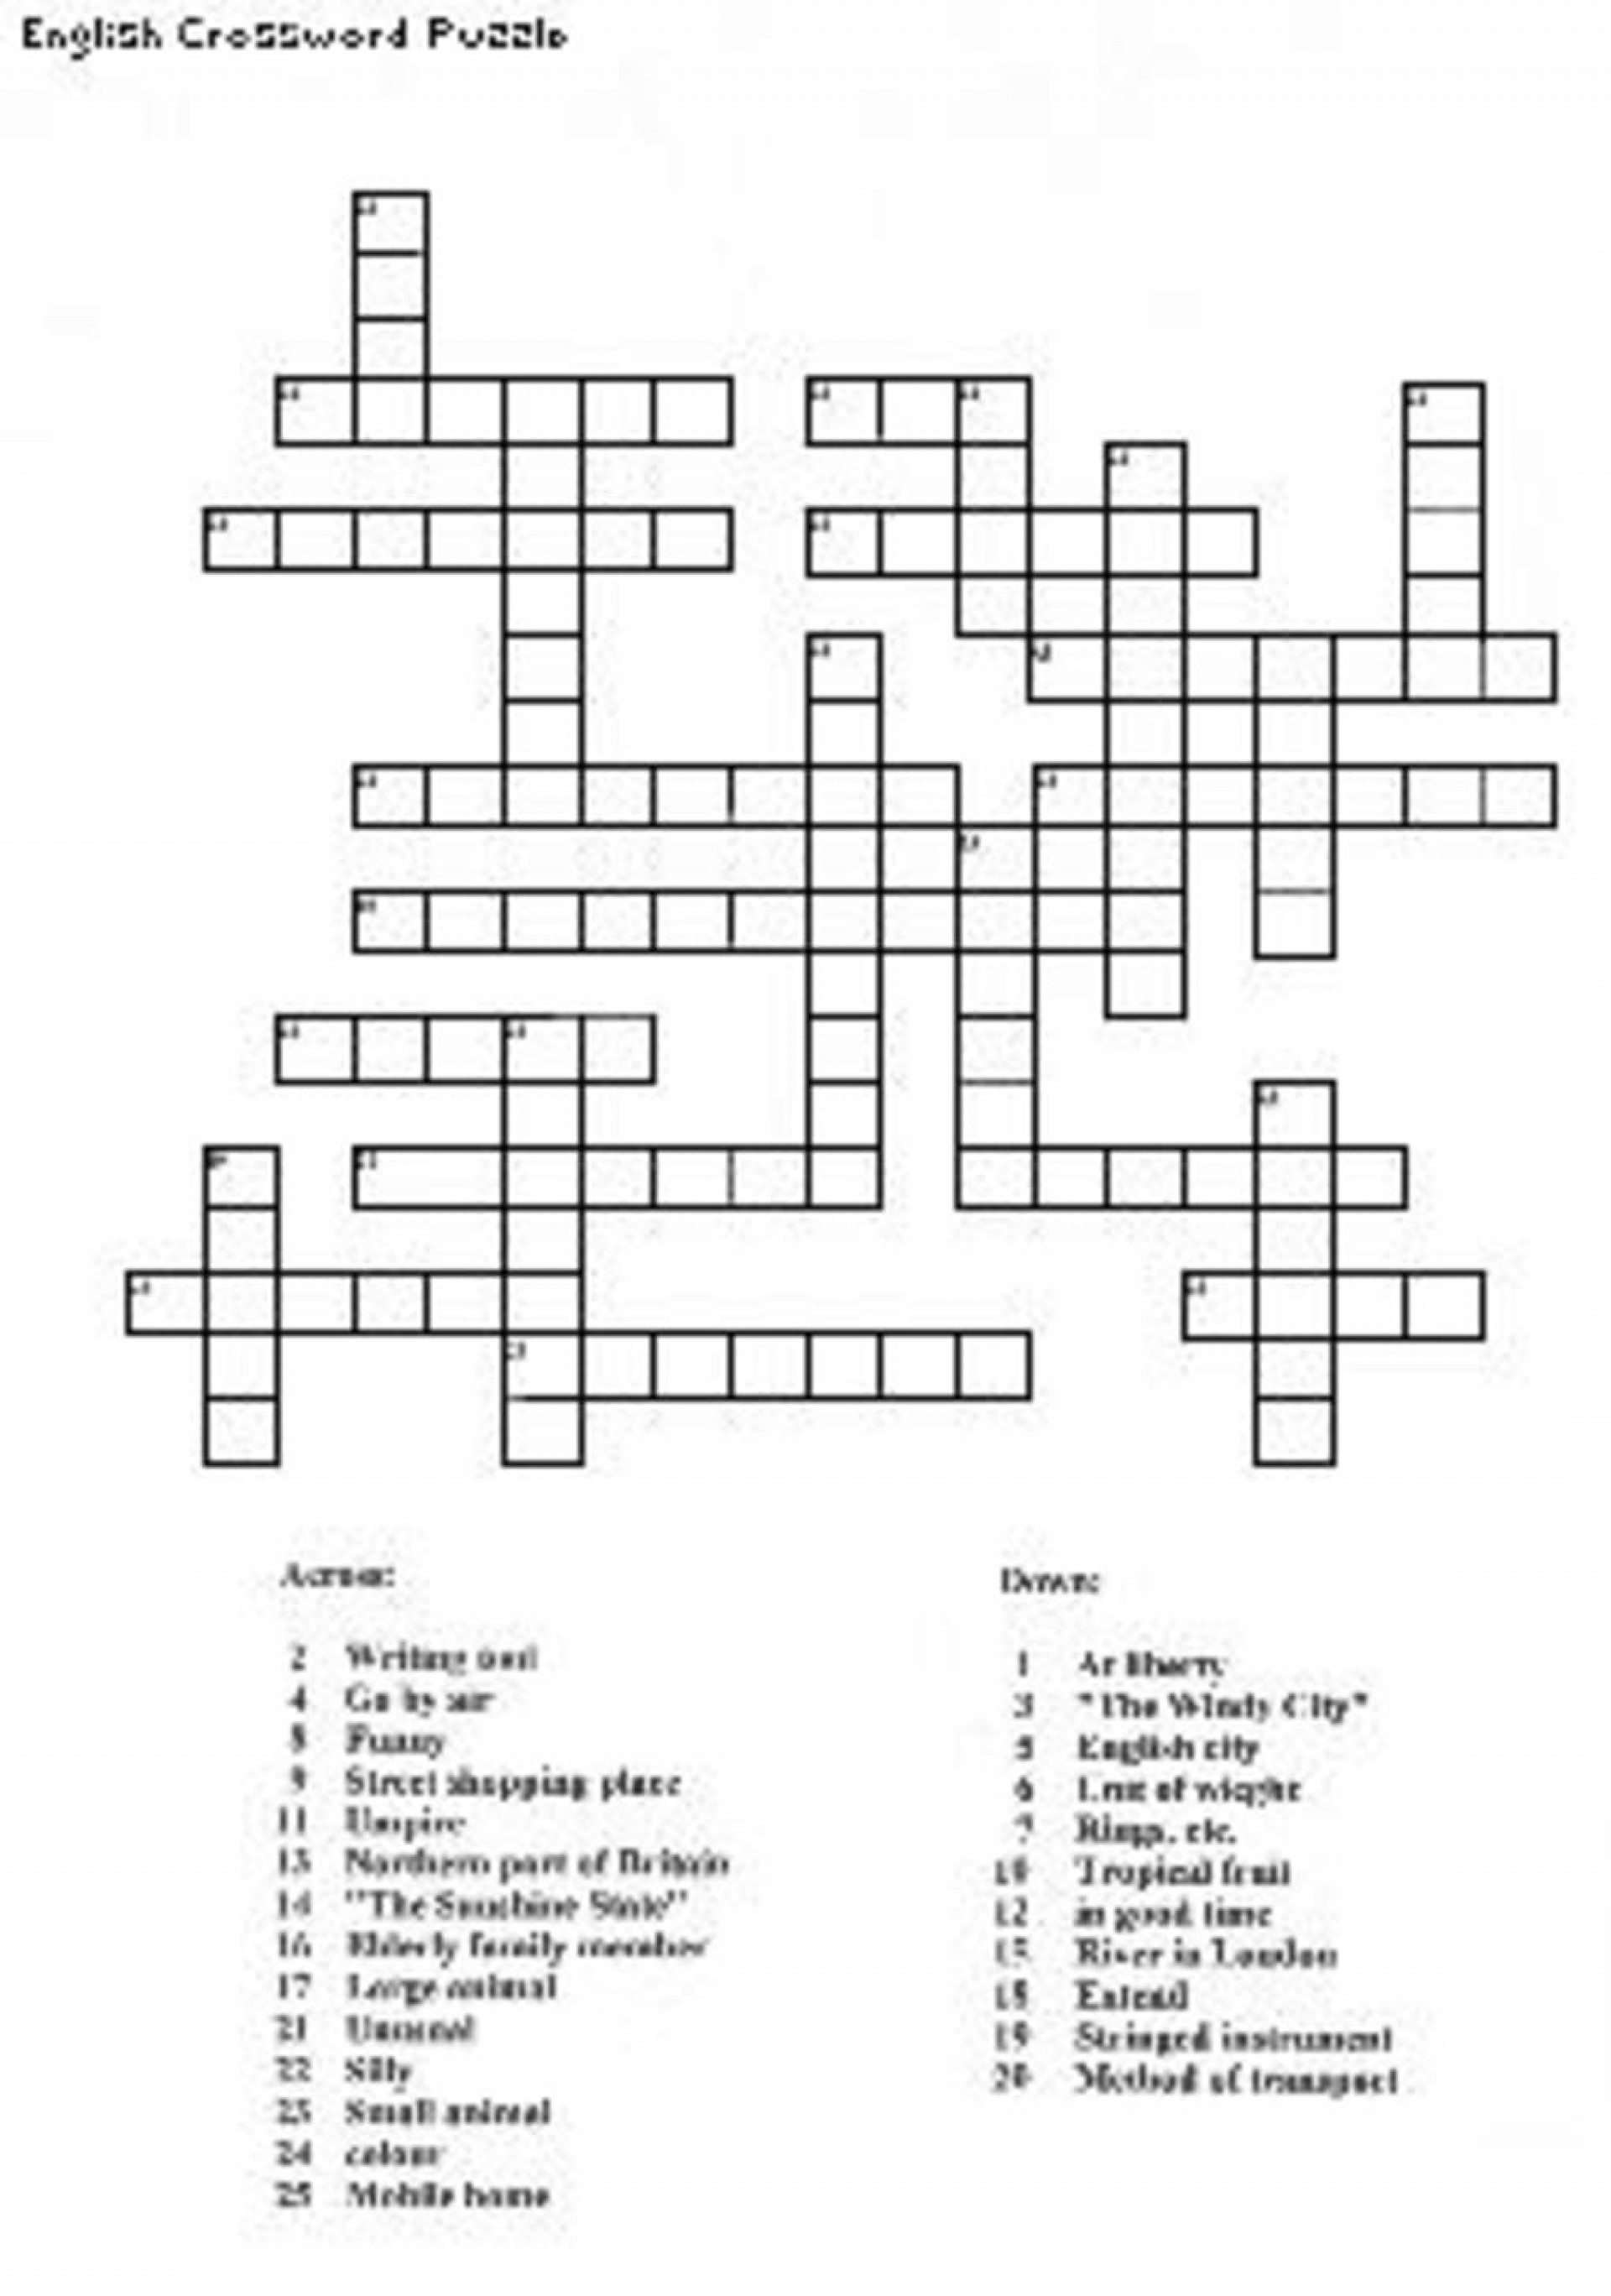 Crossword Puzzle Maker Free Printable Toolbox Screenshot - Create A - Make Your Own Crossword Puzzle Free Printable